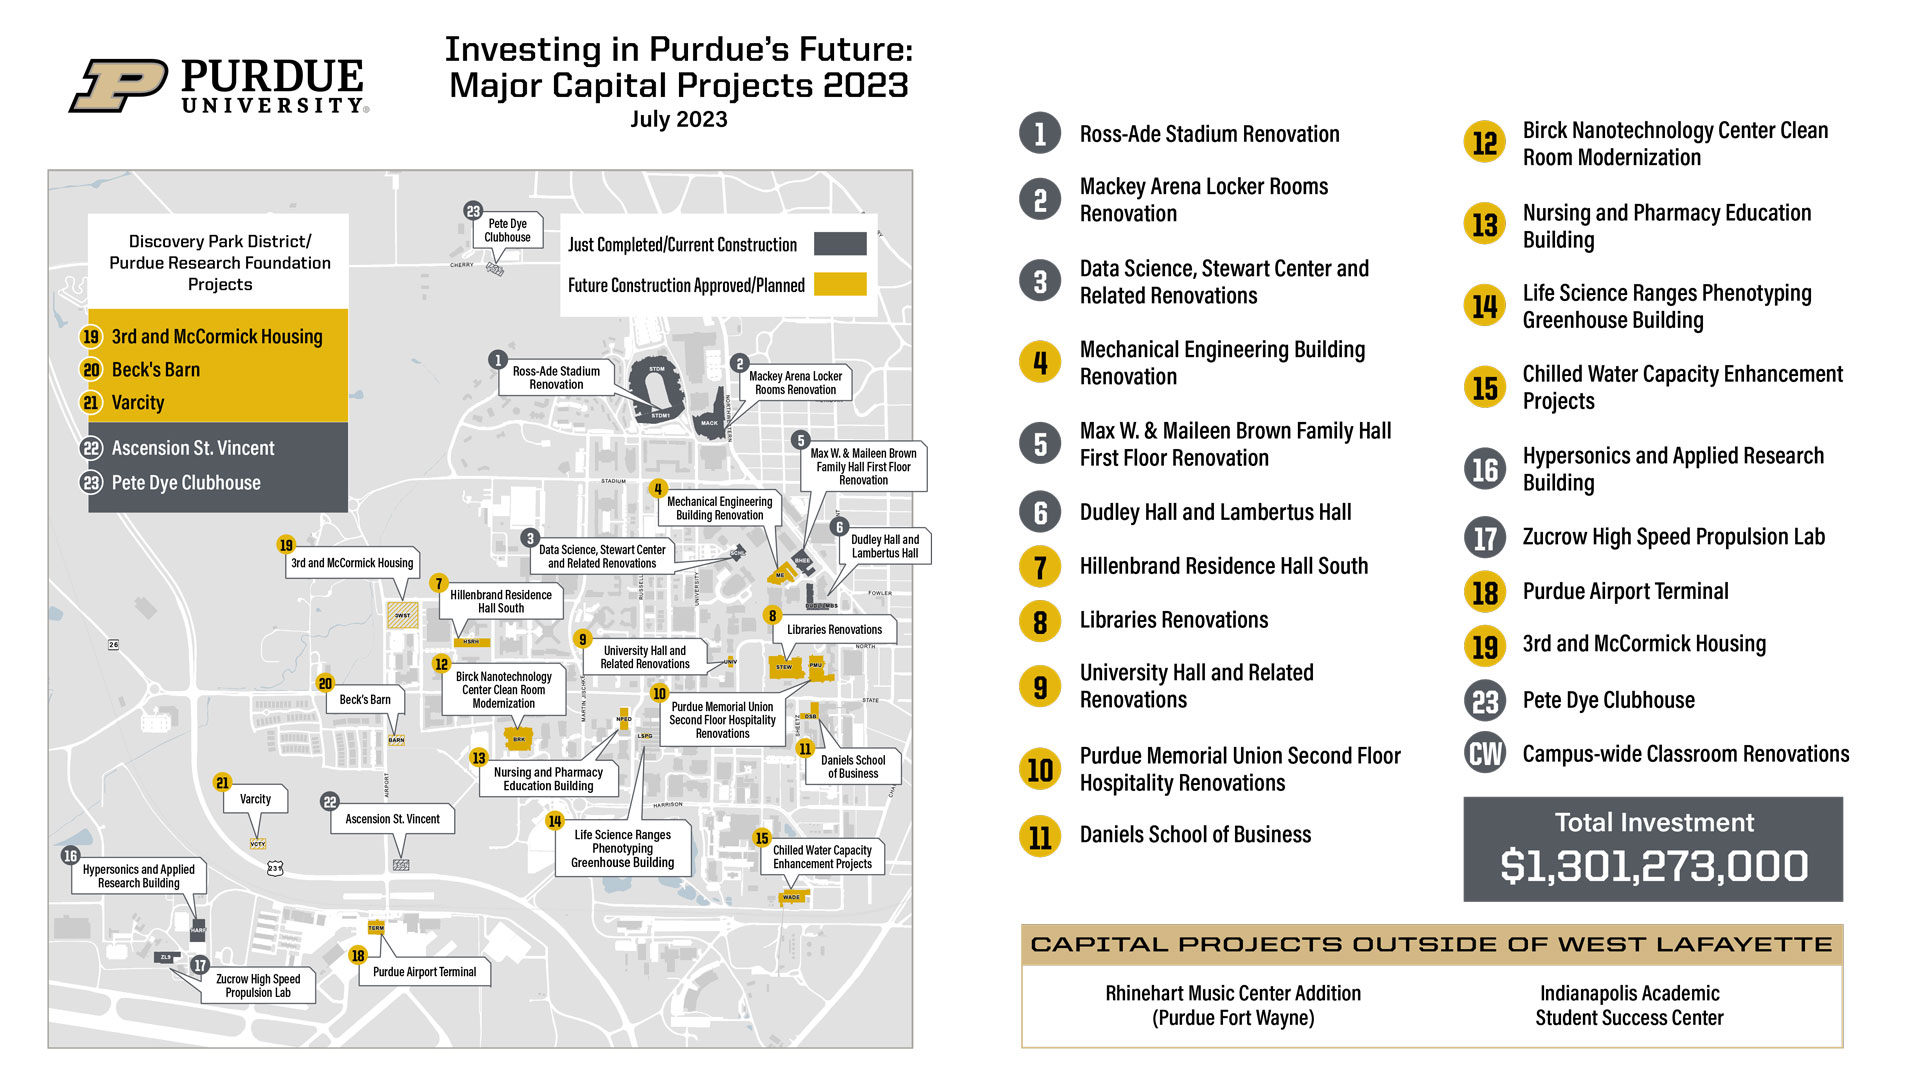 Investing in Purdue's Future: Major Capital Projects 2023